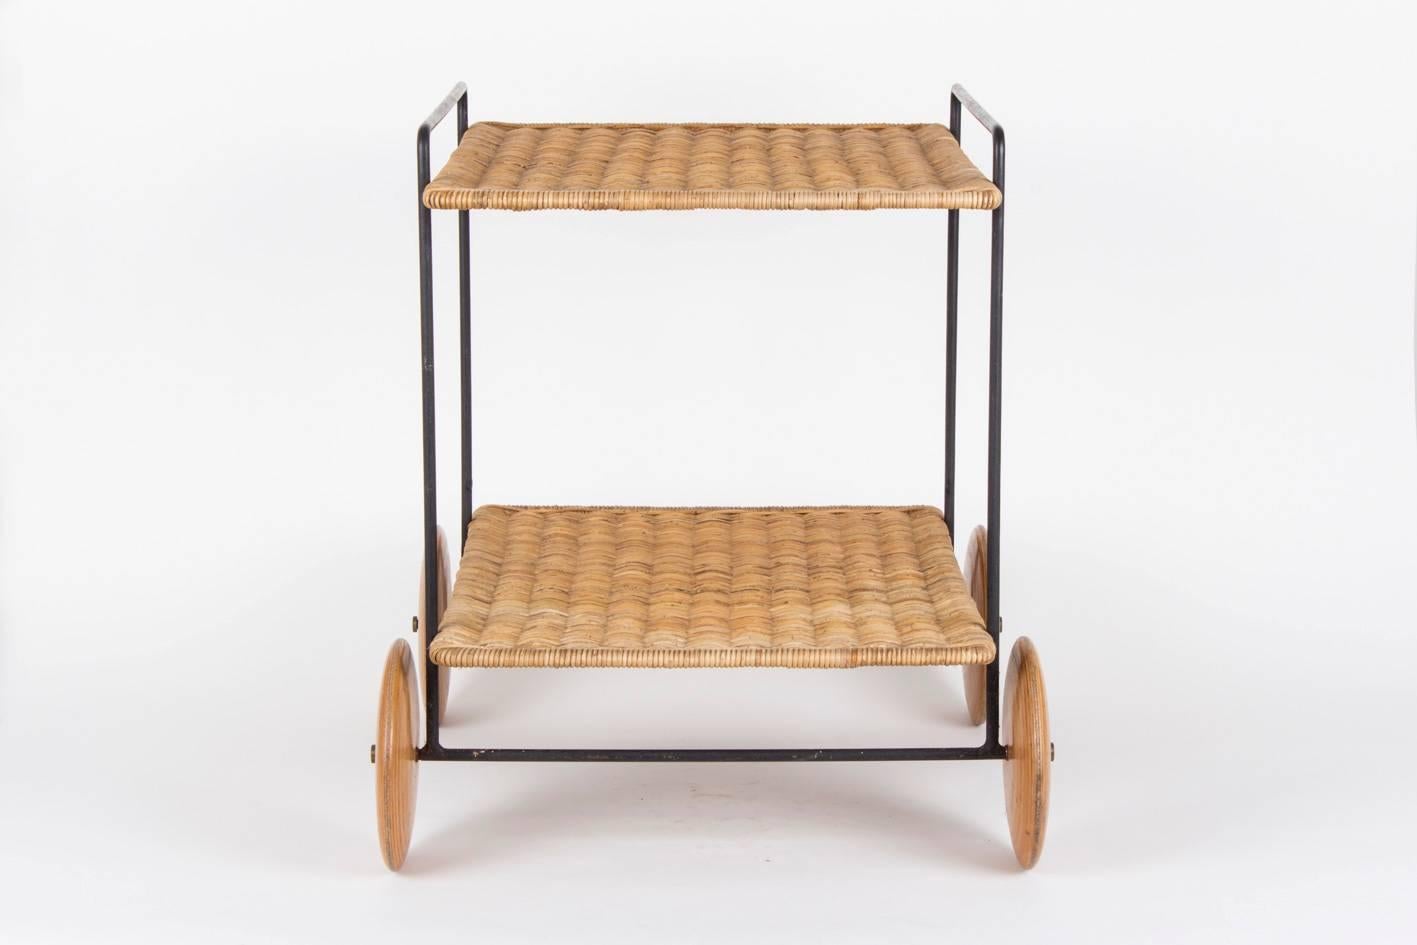 A marvelously preserved serving trolley designed by Carl Auböck in his famous workshop in Vienna.

The shelf’s made of handwoven wicker, the frame produced in painted metal, wheels made of beechwood with the typical brass knobs.

Illustrated